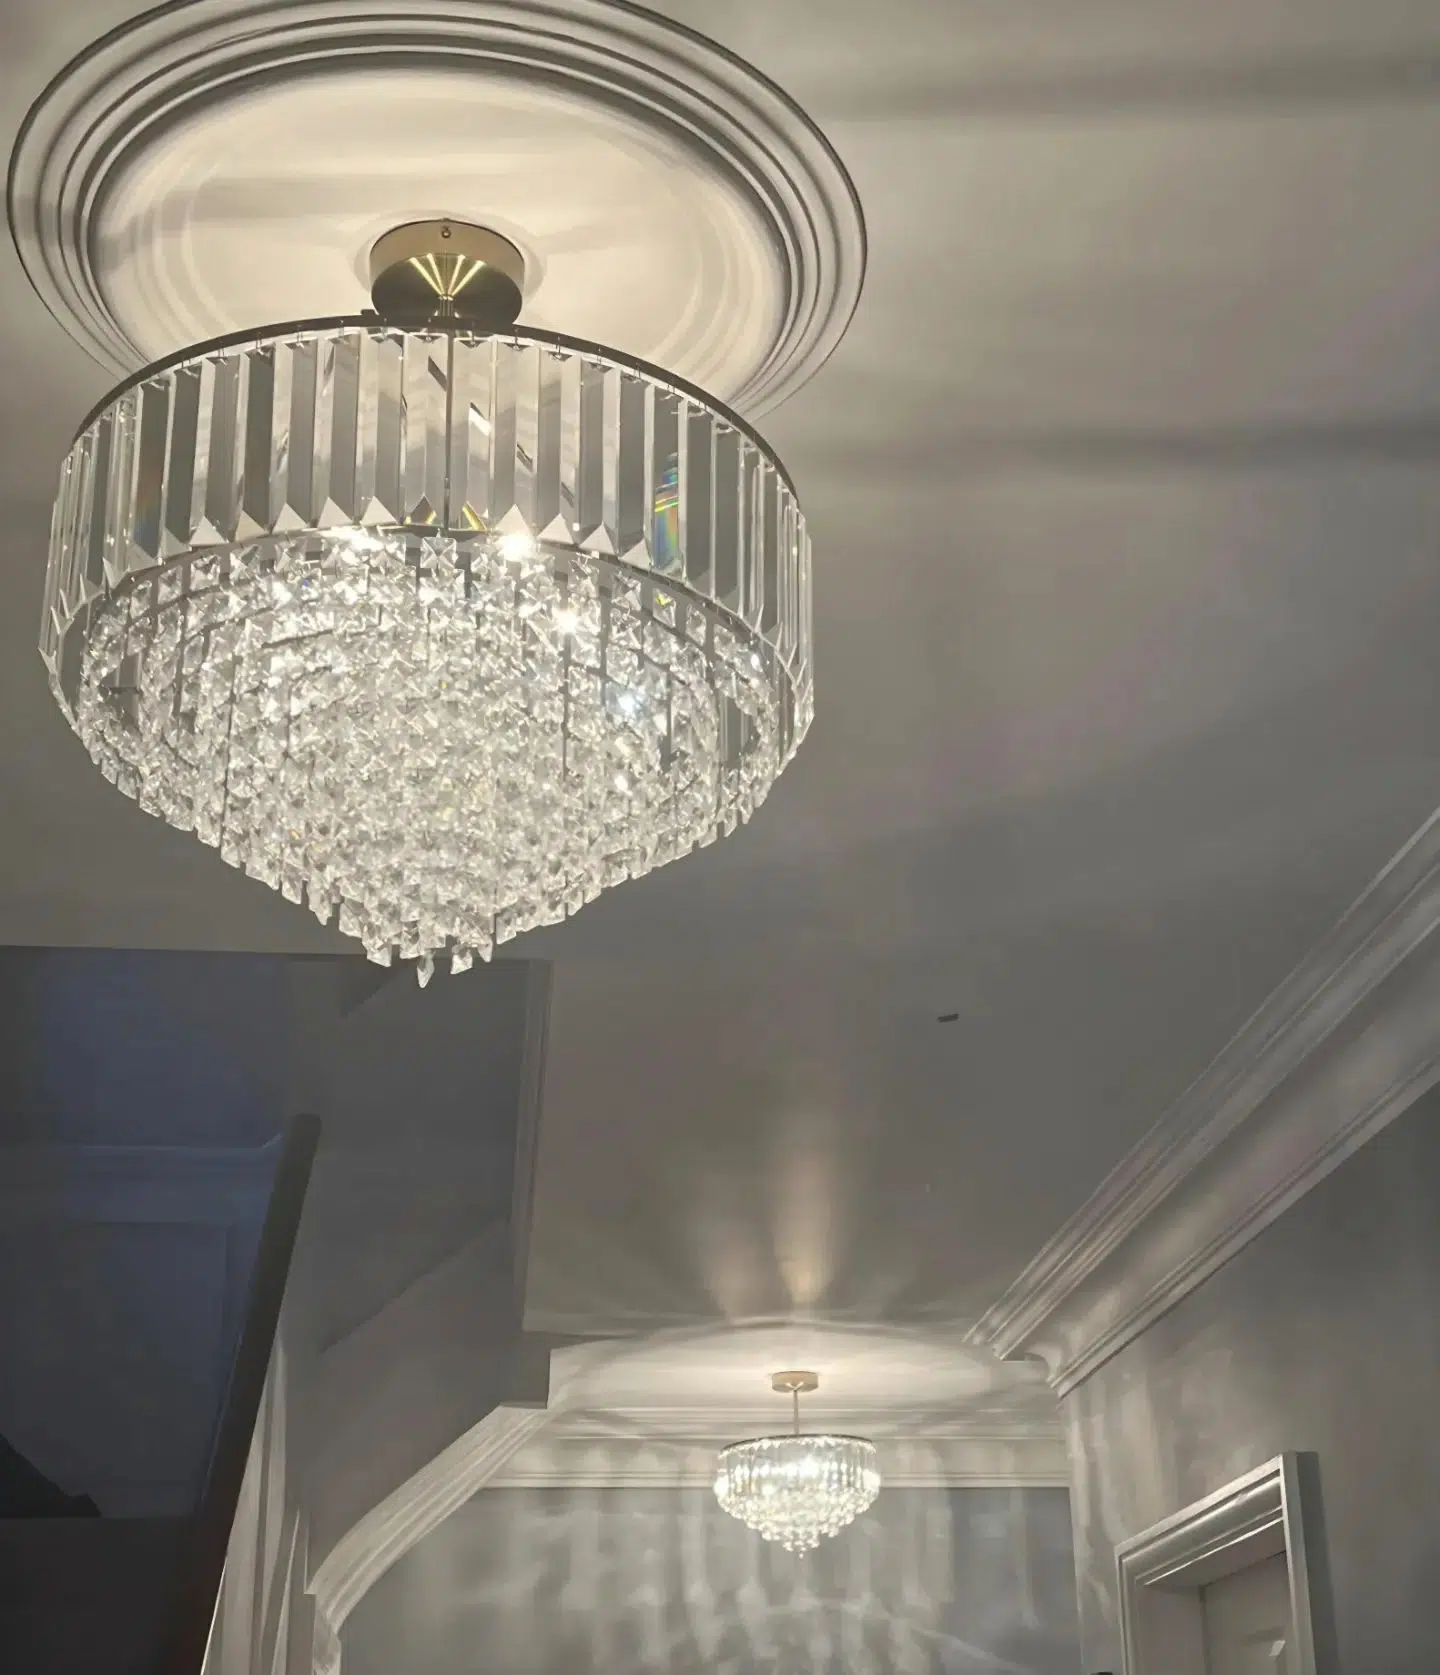 Thanks so much to our wonderful customer Rachel @princessaurora76 for sharing pictures of the stunning Laura Ashley Vienna 5 light fitting in her home. 💡